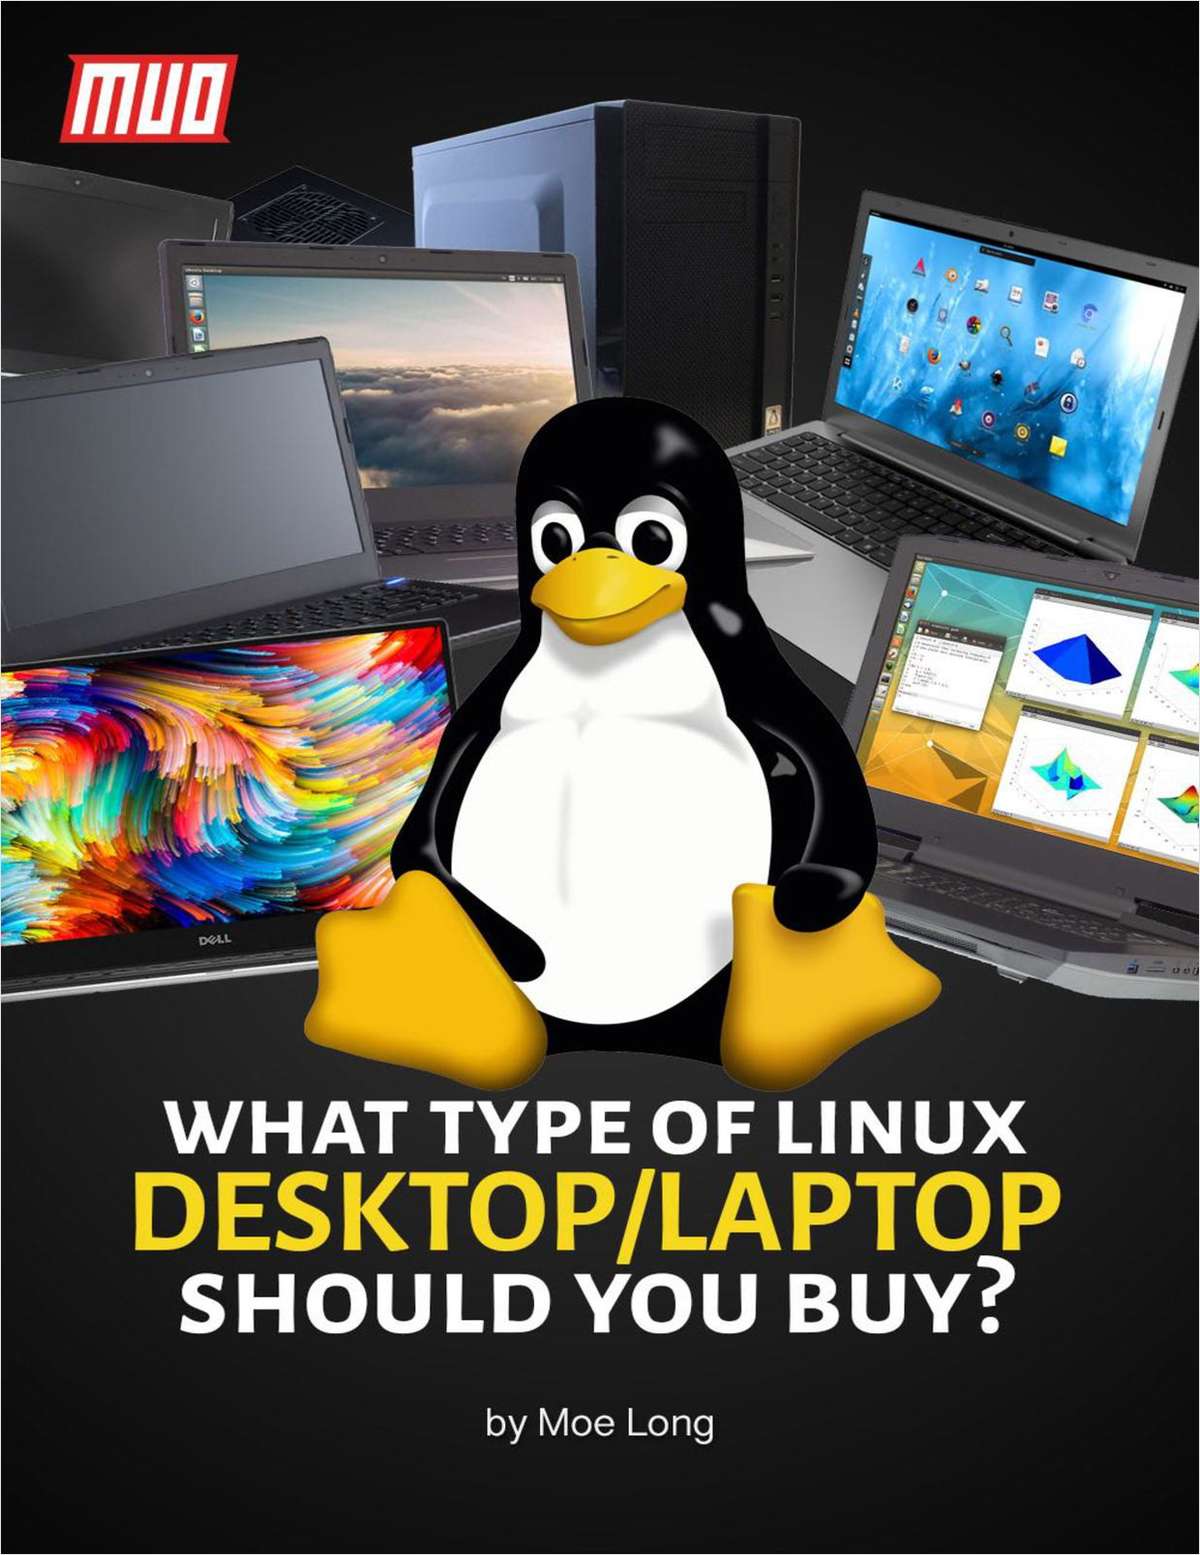 The 8 Best Linux Desktop Computers and Laptops You Can Buy